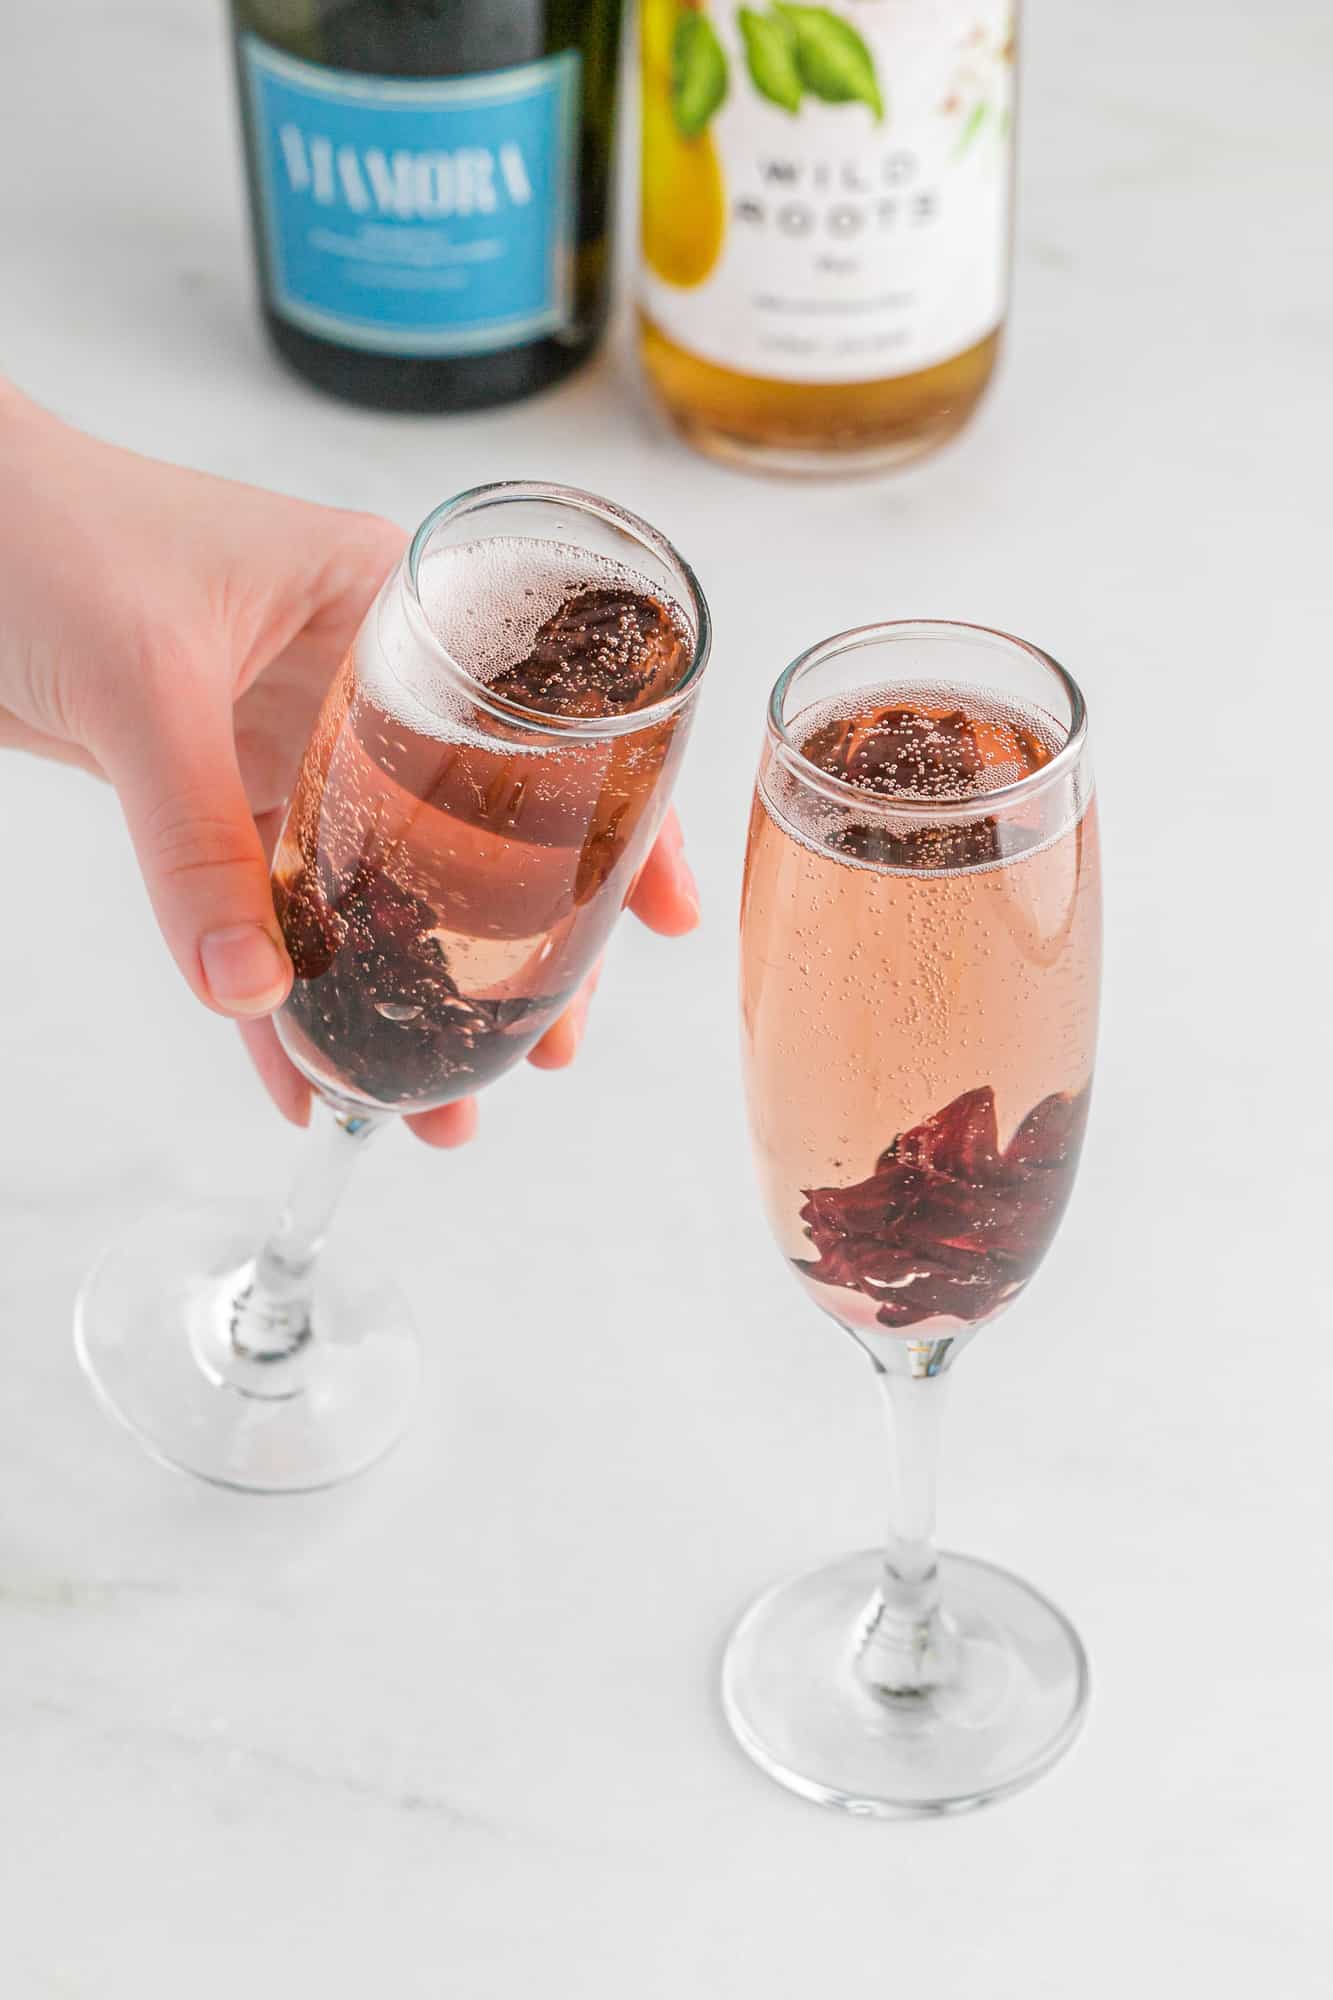 Two champagne flutes, one held in a hand, containing hibiscus mimosas.